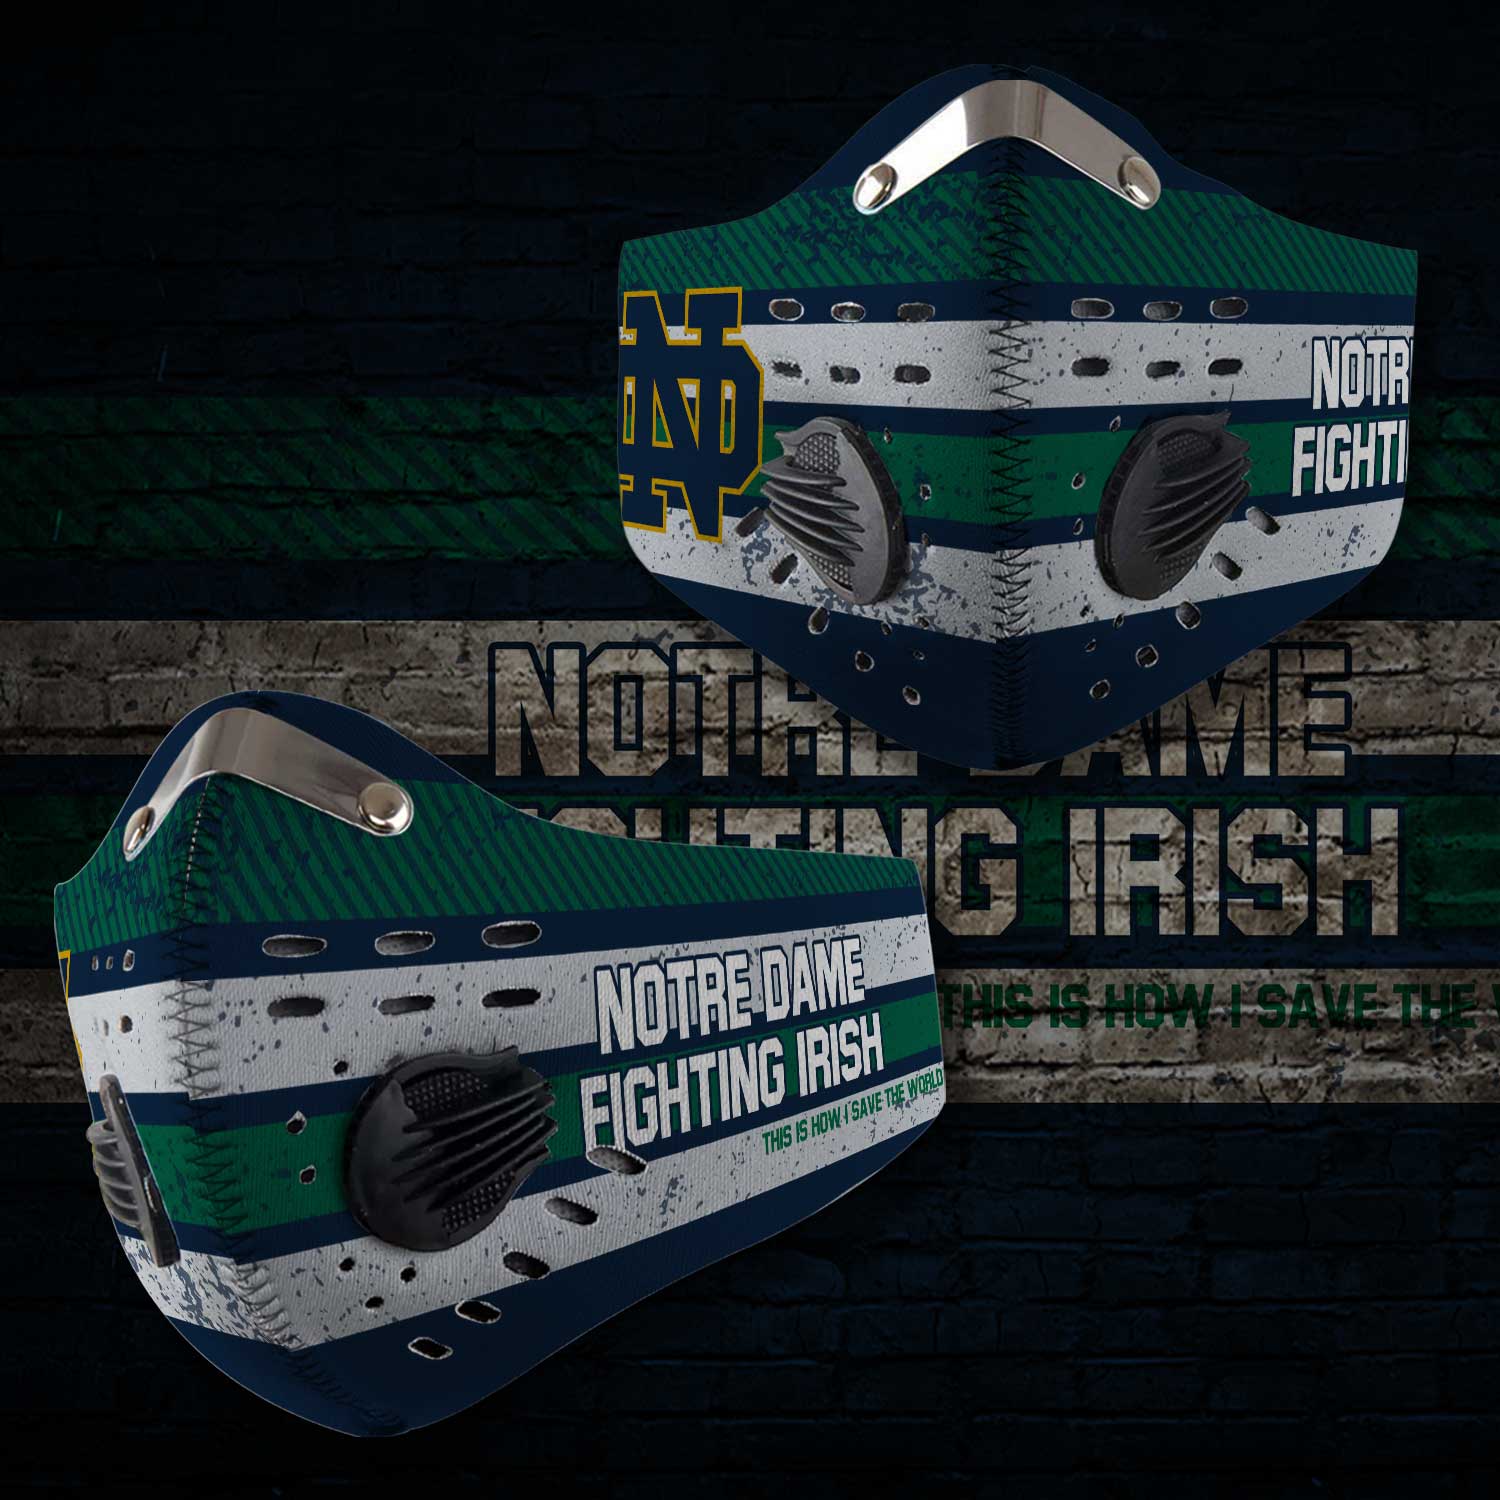 Notre dame fighting irish this is how i save the world face mask